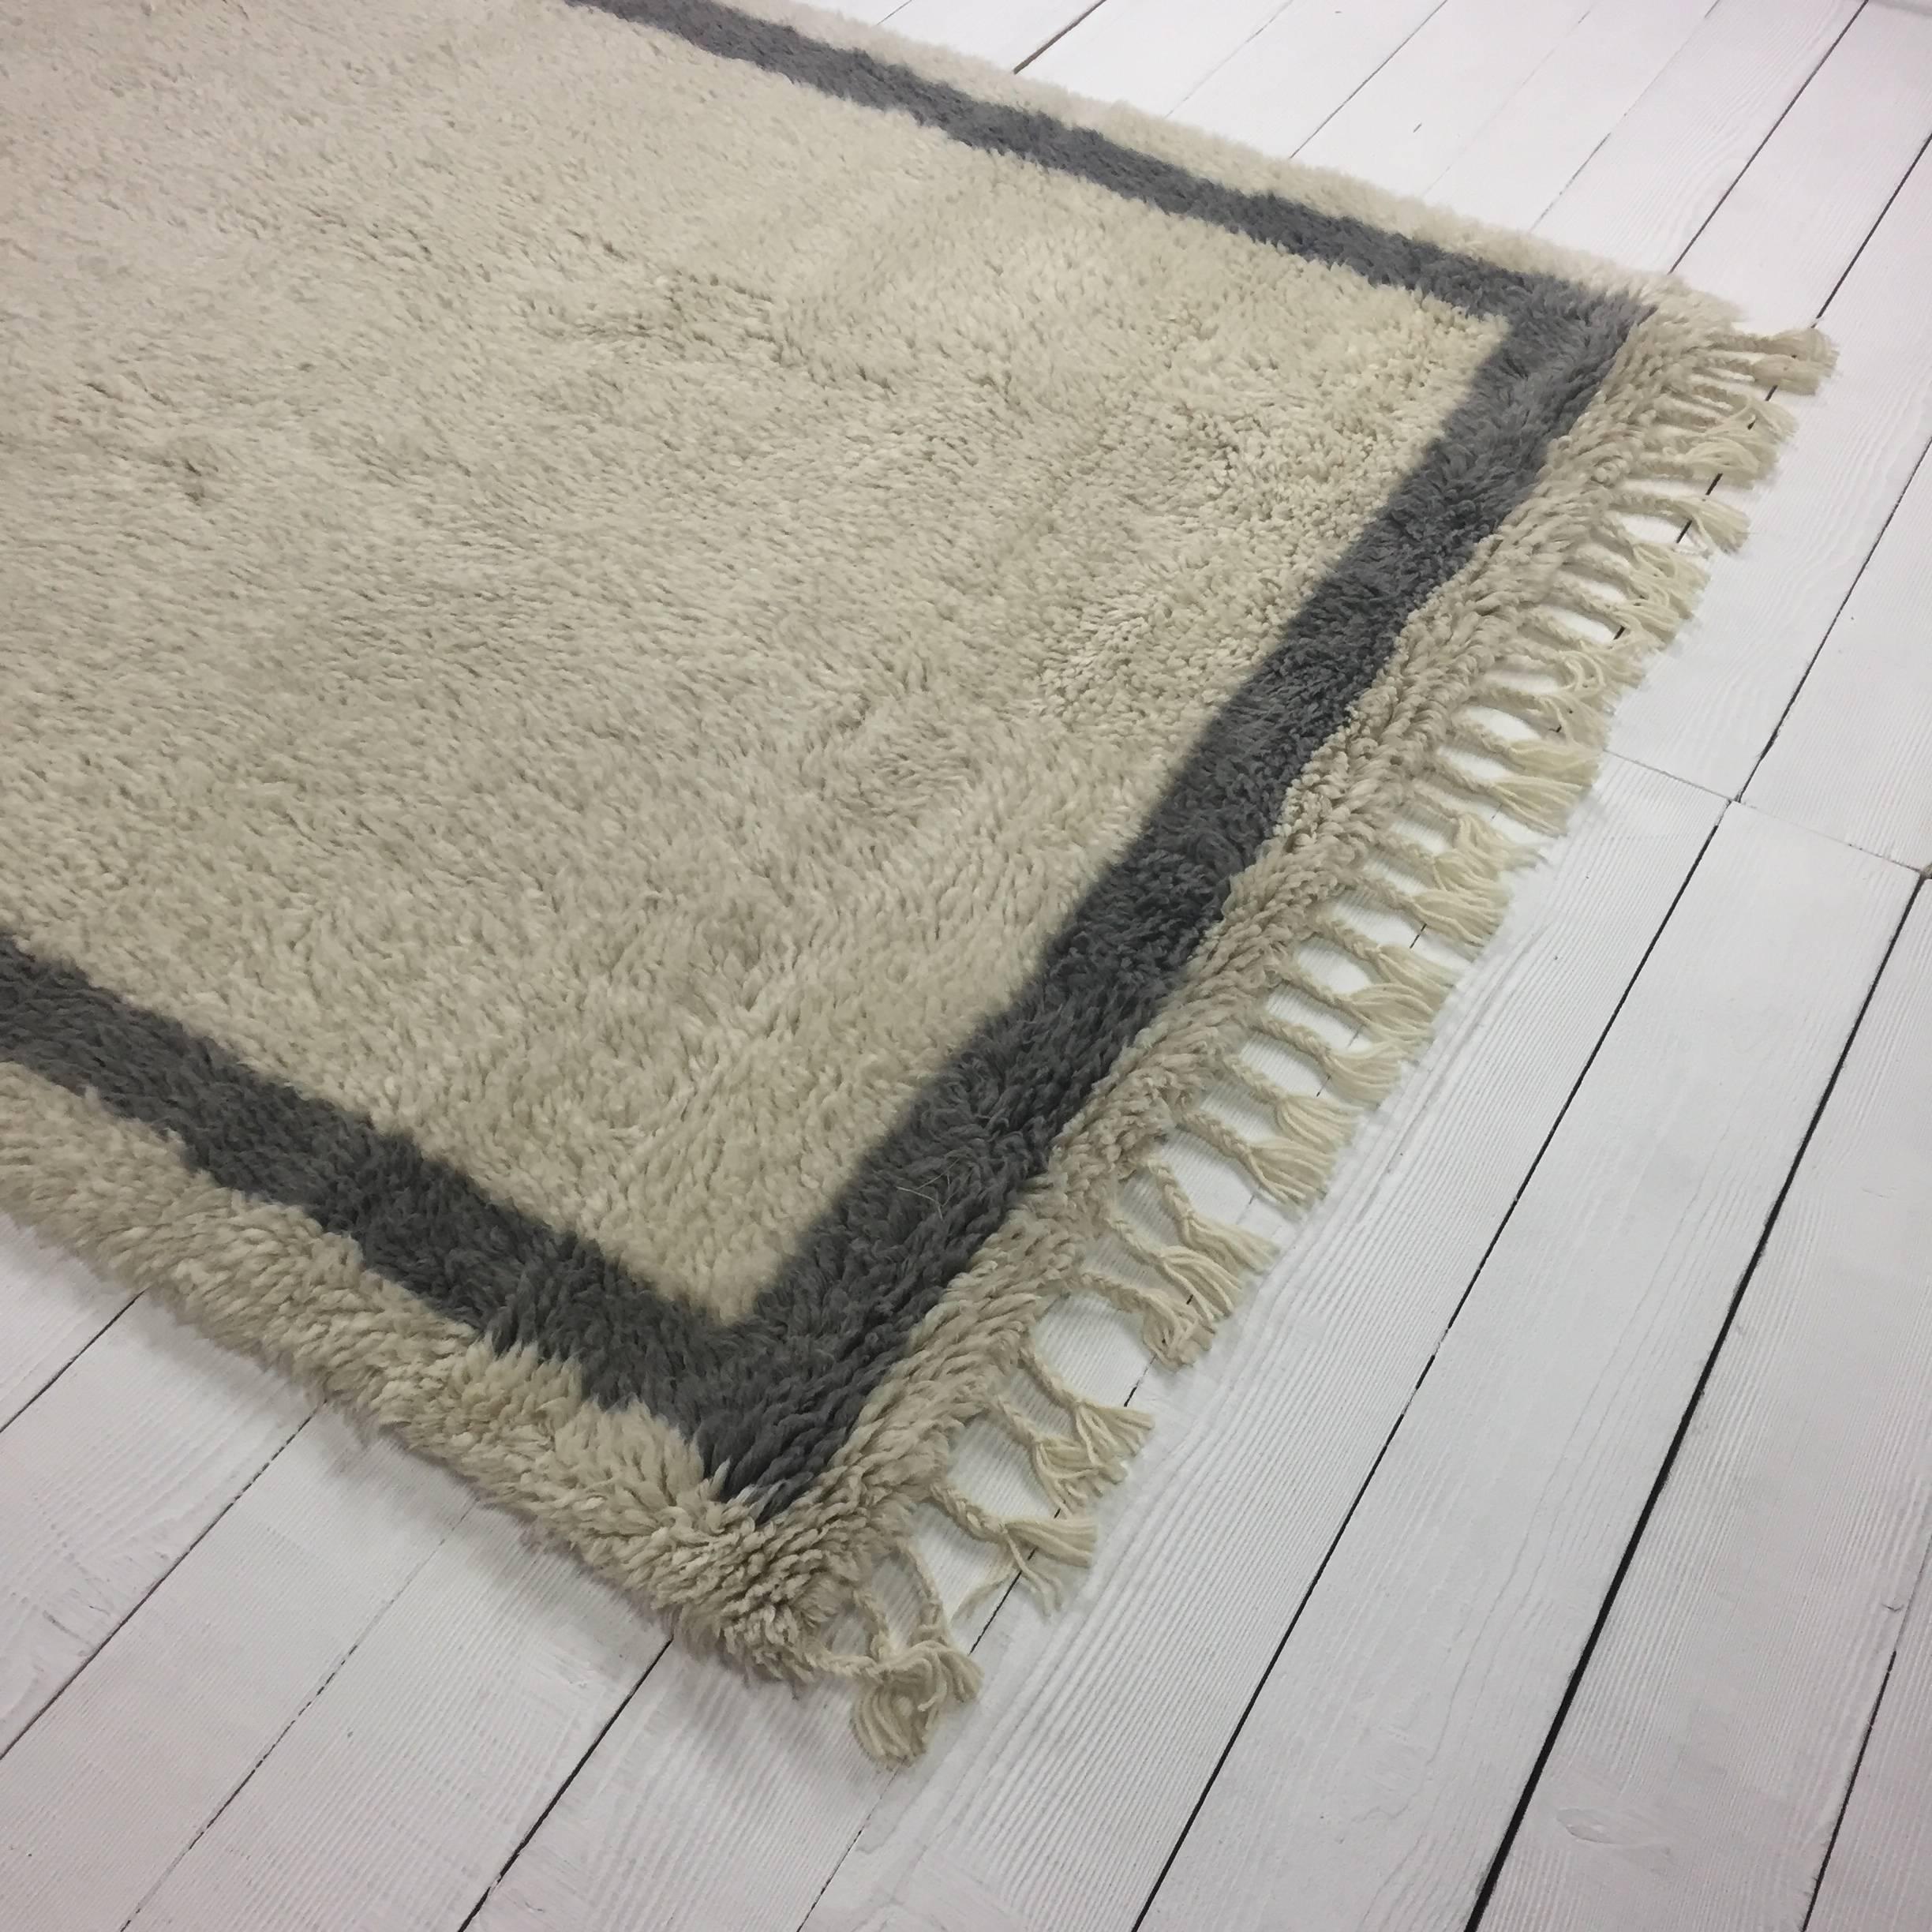 Luxurious handmade shaggy wool rug in ivory wool with graphite grey border. Inspired by Beni Ourain rugs from Morocco but with a more contemporary and less tribal design. Unbelievably soft and fluffy underfoot, perfect for bare feet.

Available in